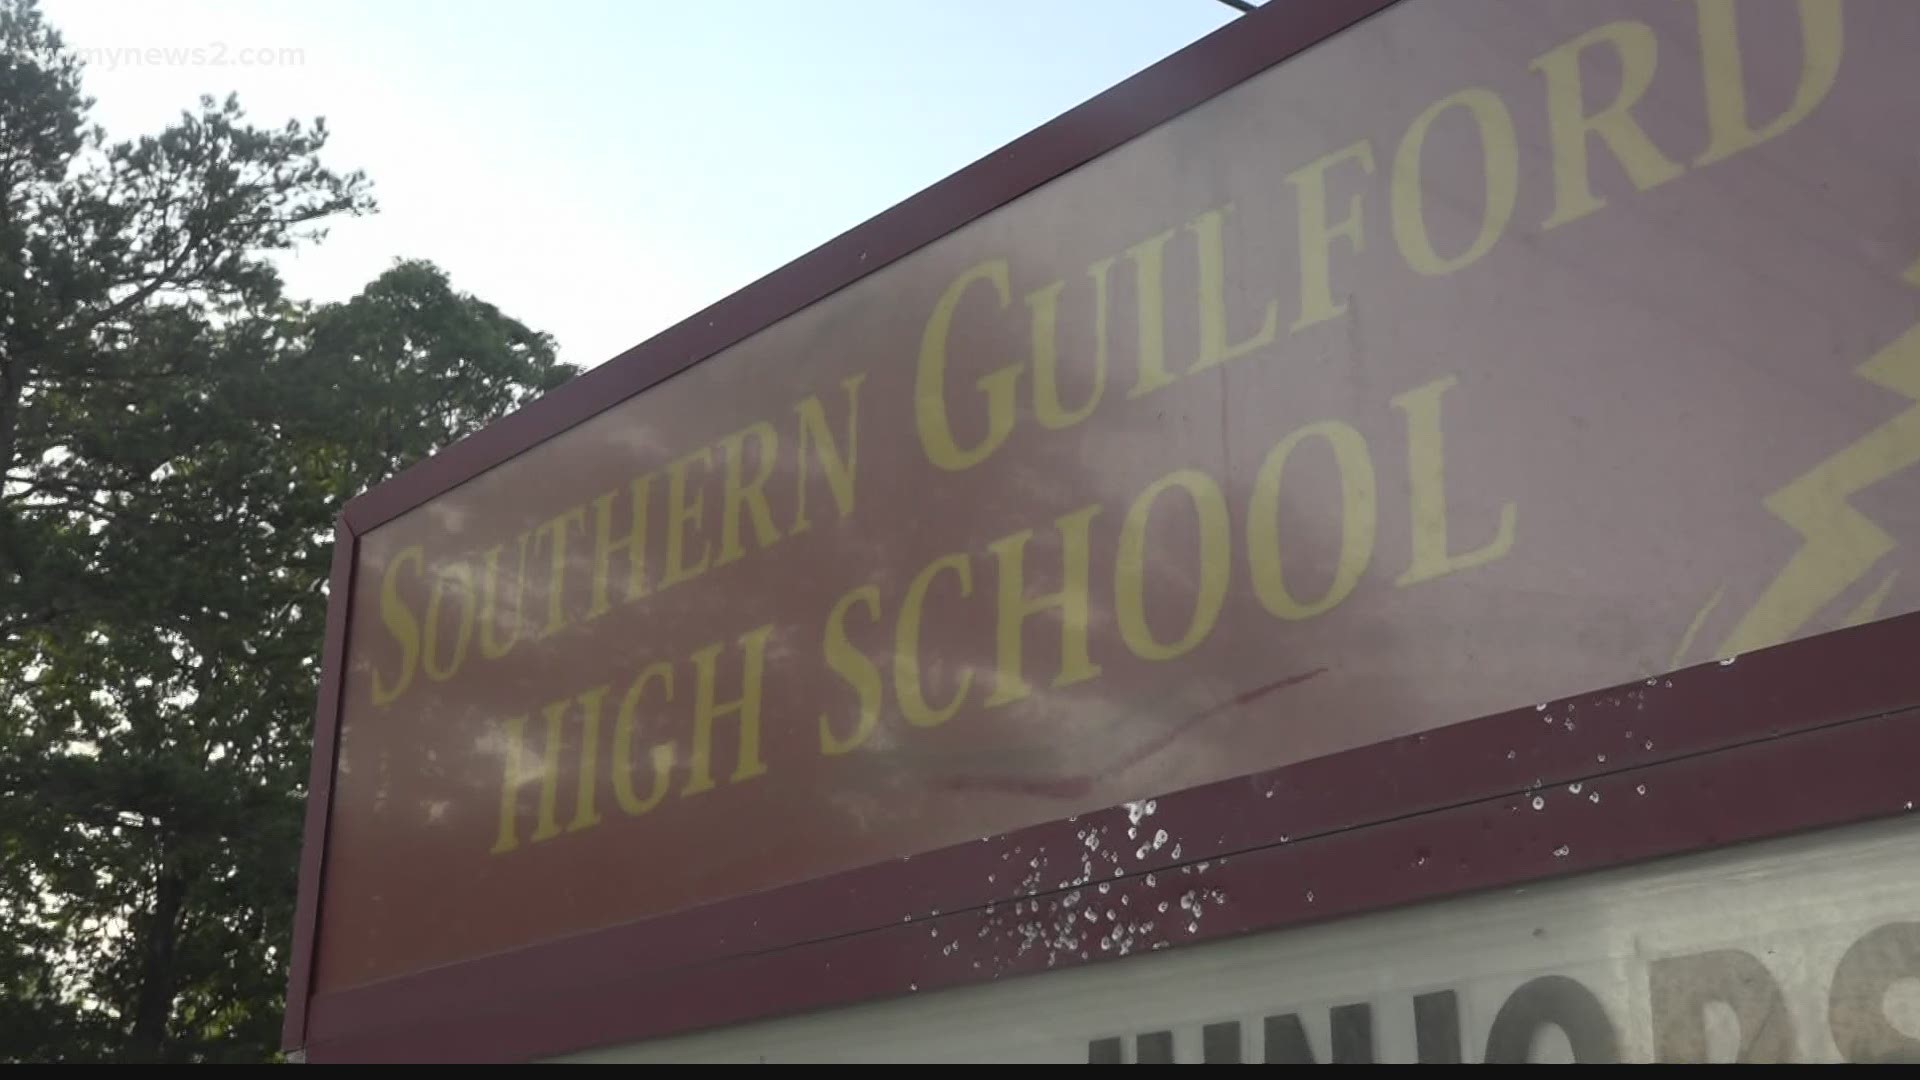 The Guilford County Sheriff’s Office said the attack at Southern Guilford was coordinated.